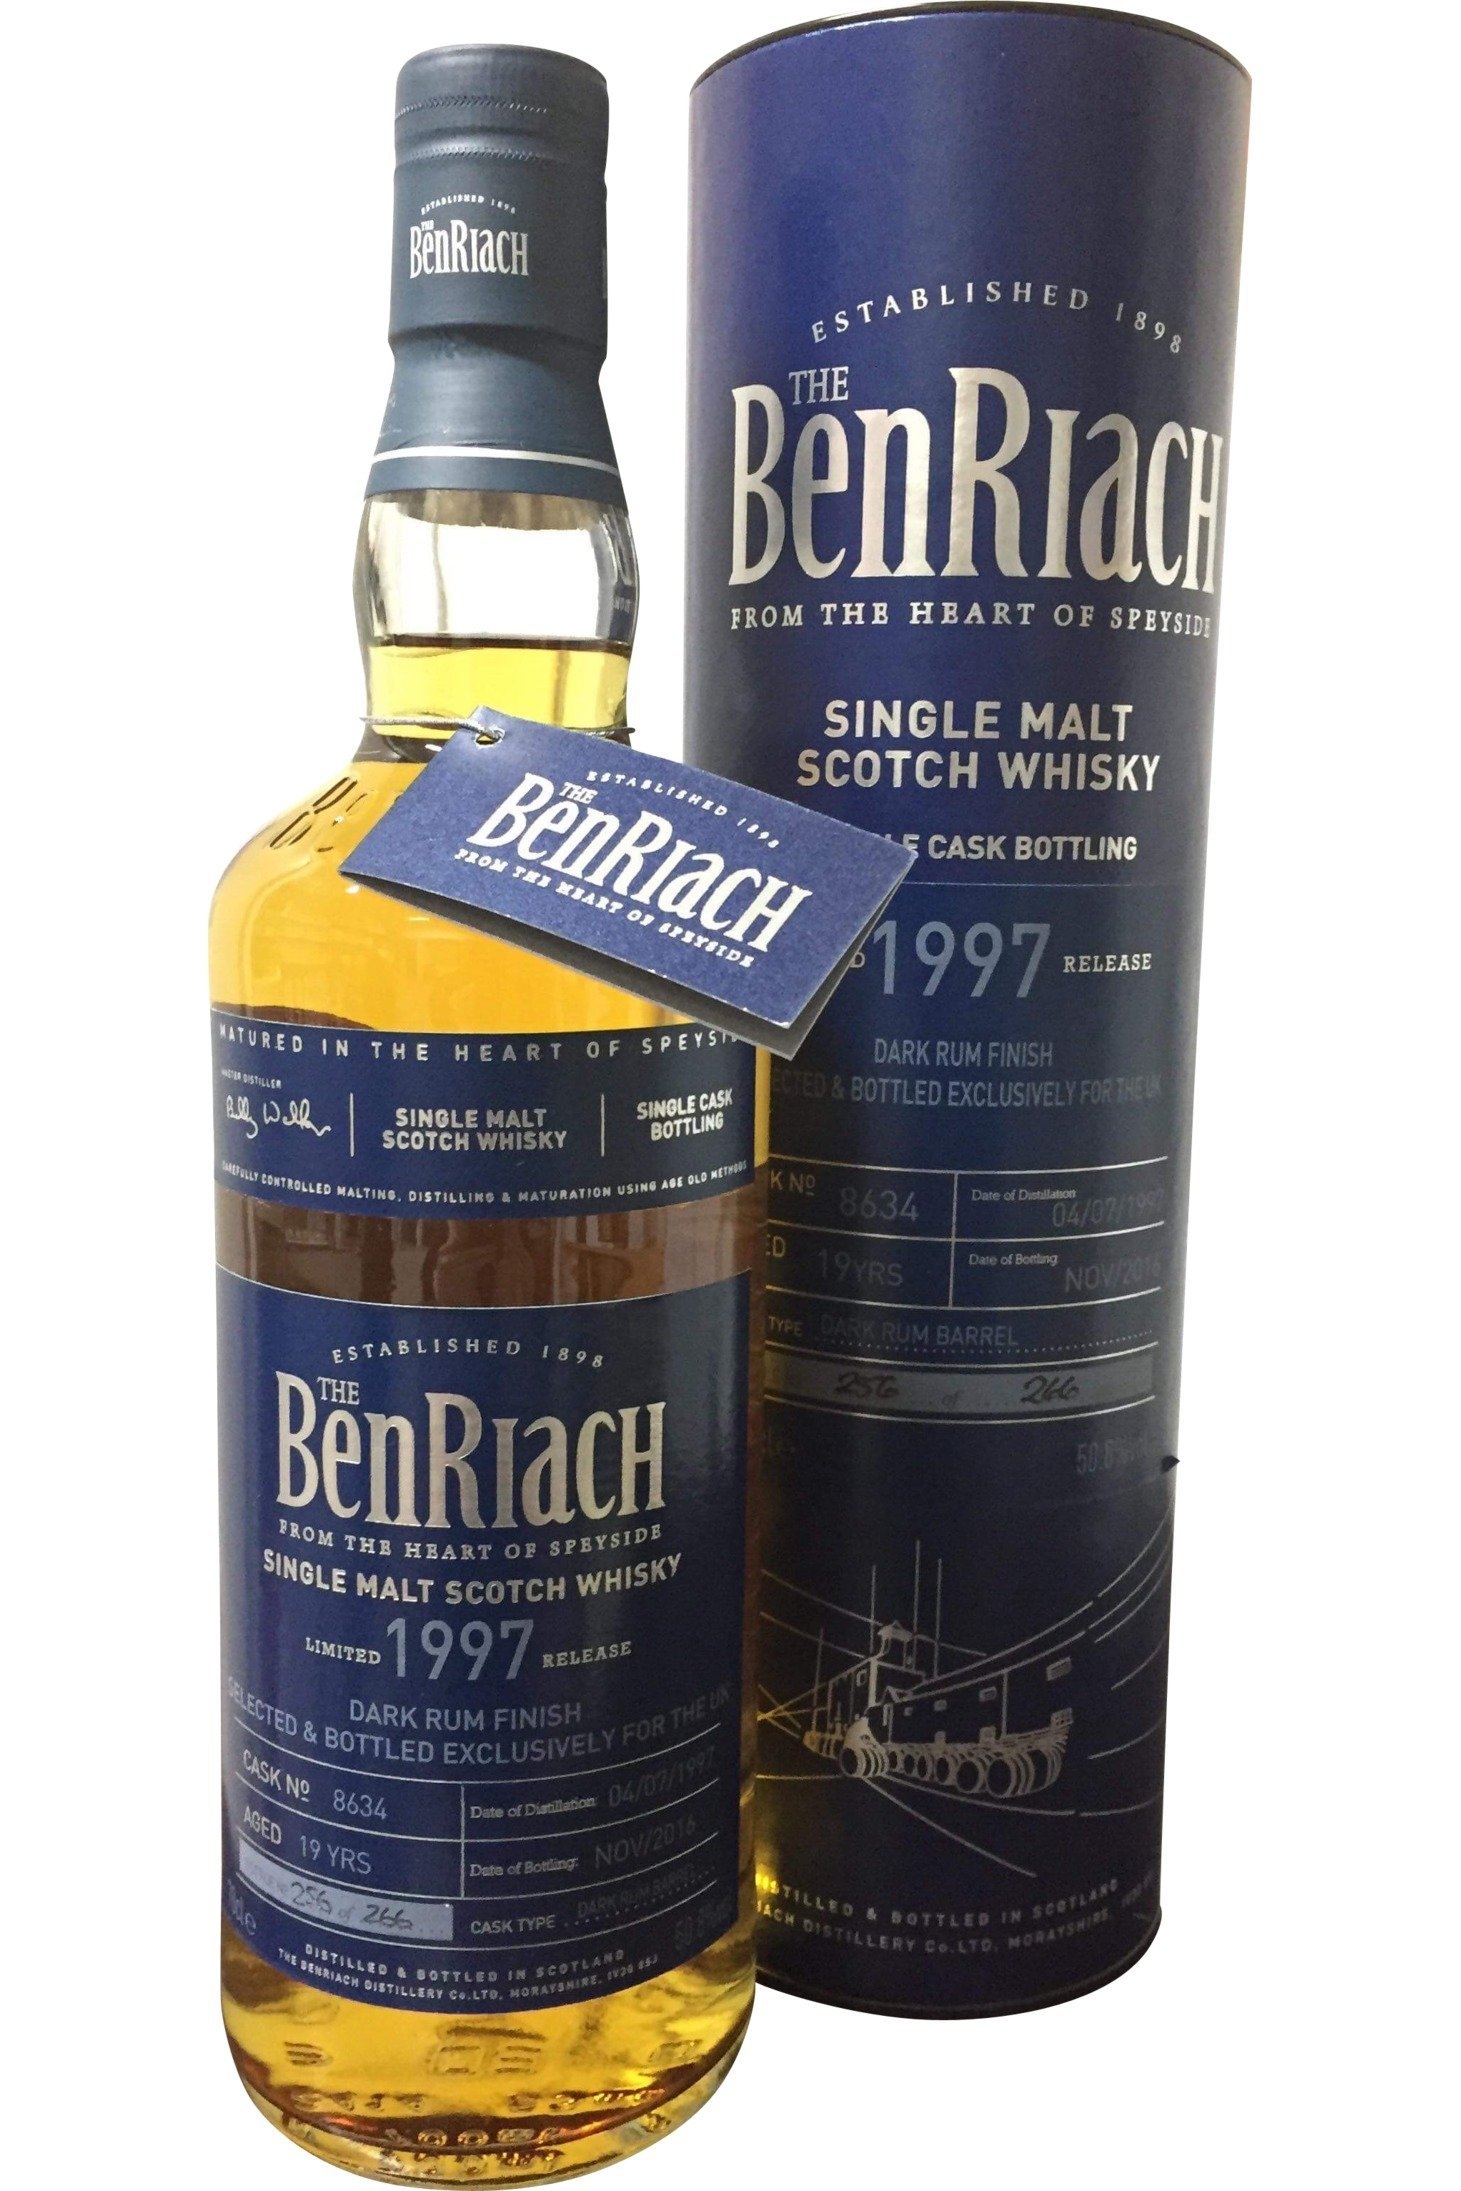 Benriach 1997 19 year old single cask#8634| 50.8% 700ml